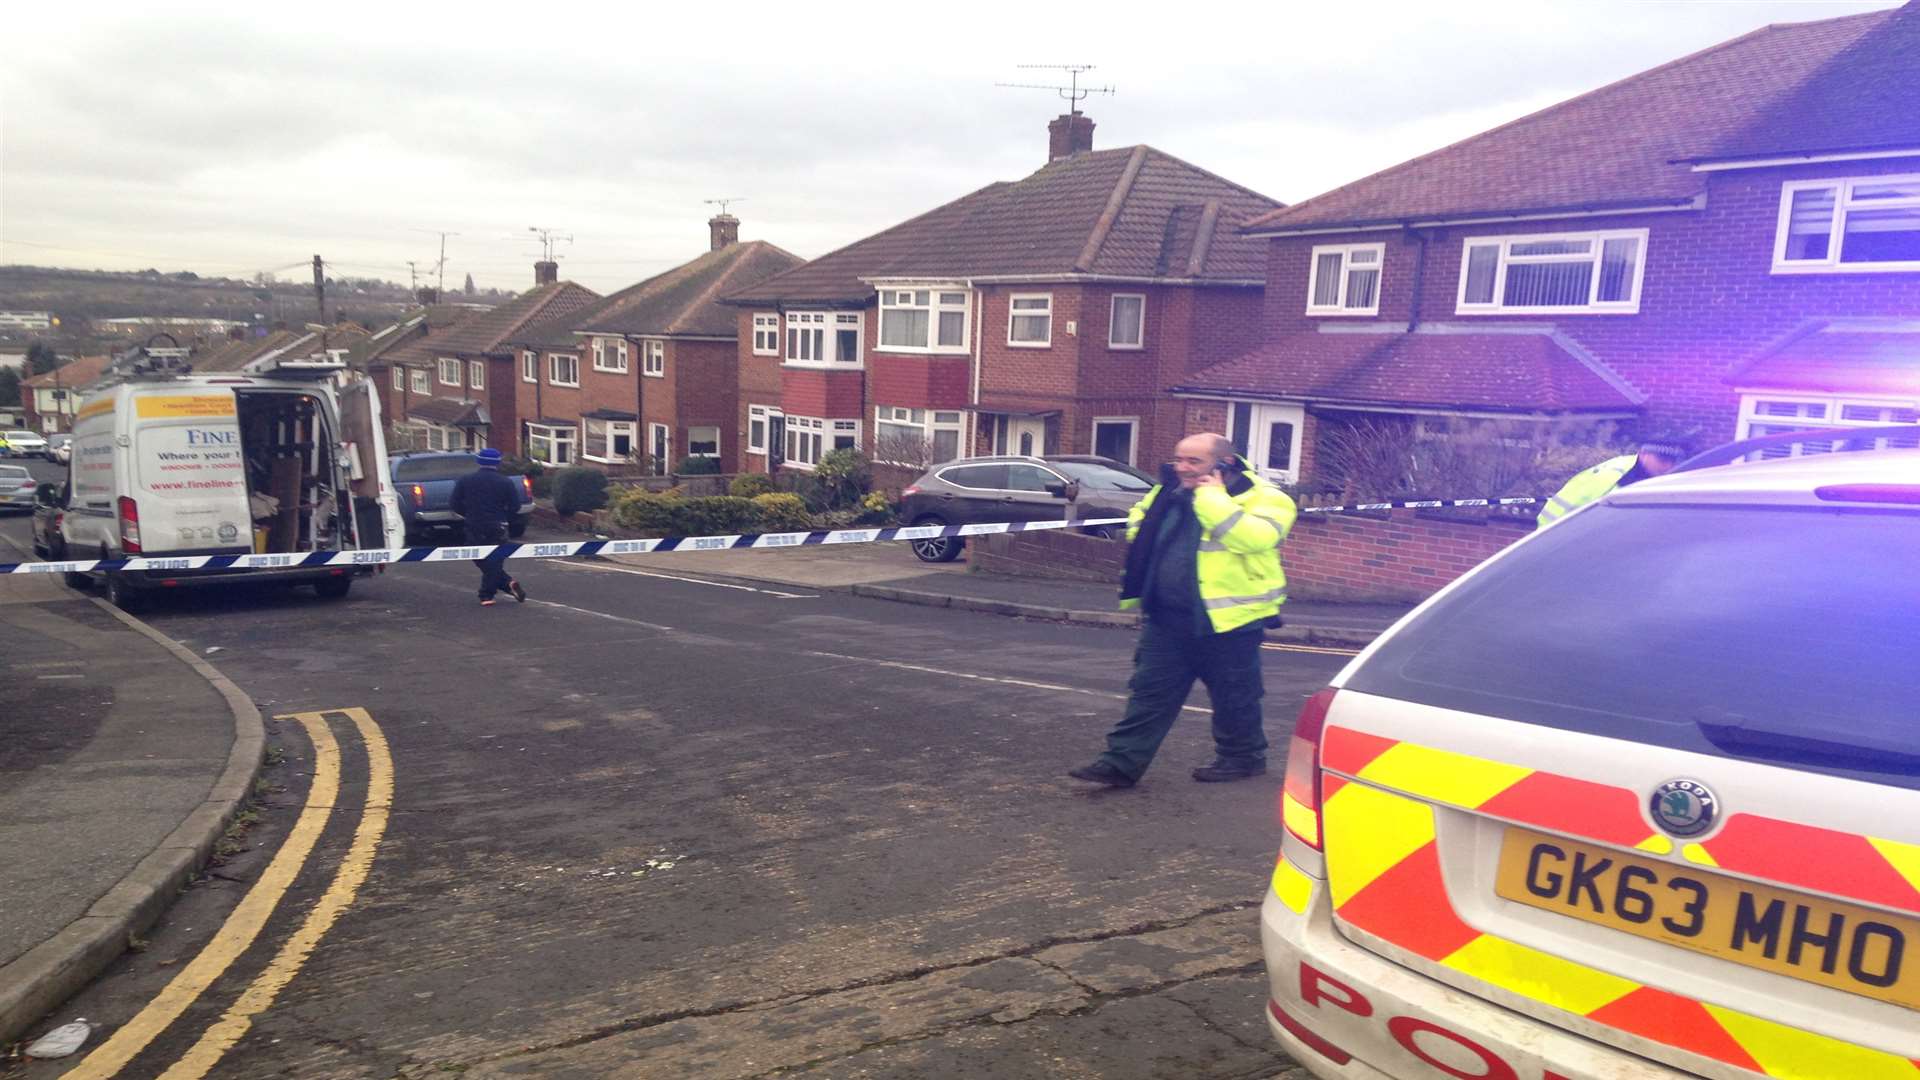 Armed police were sent to Brambletree Crescent.